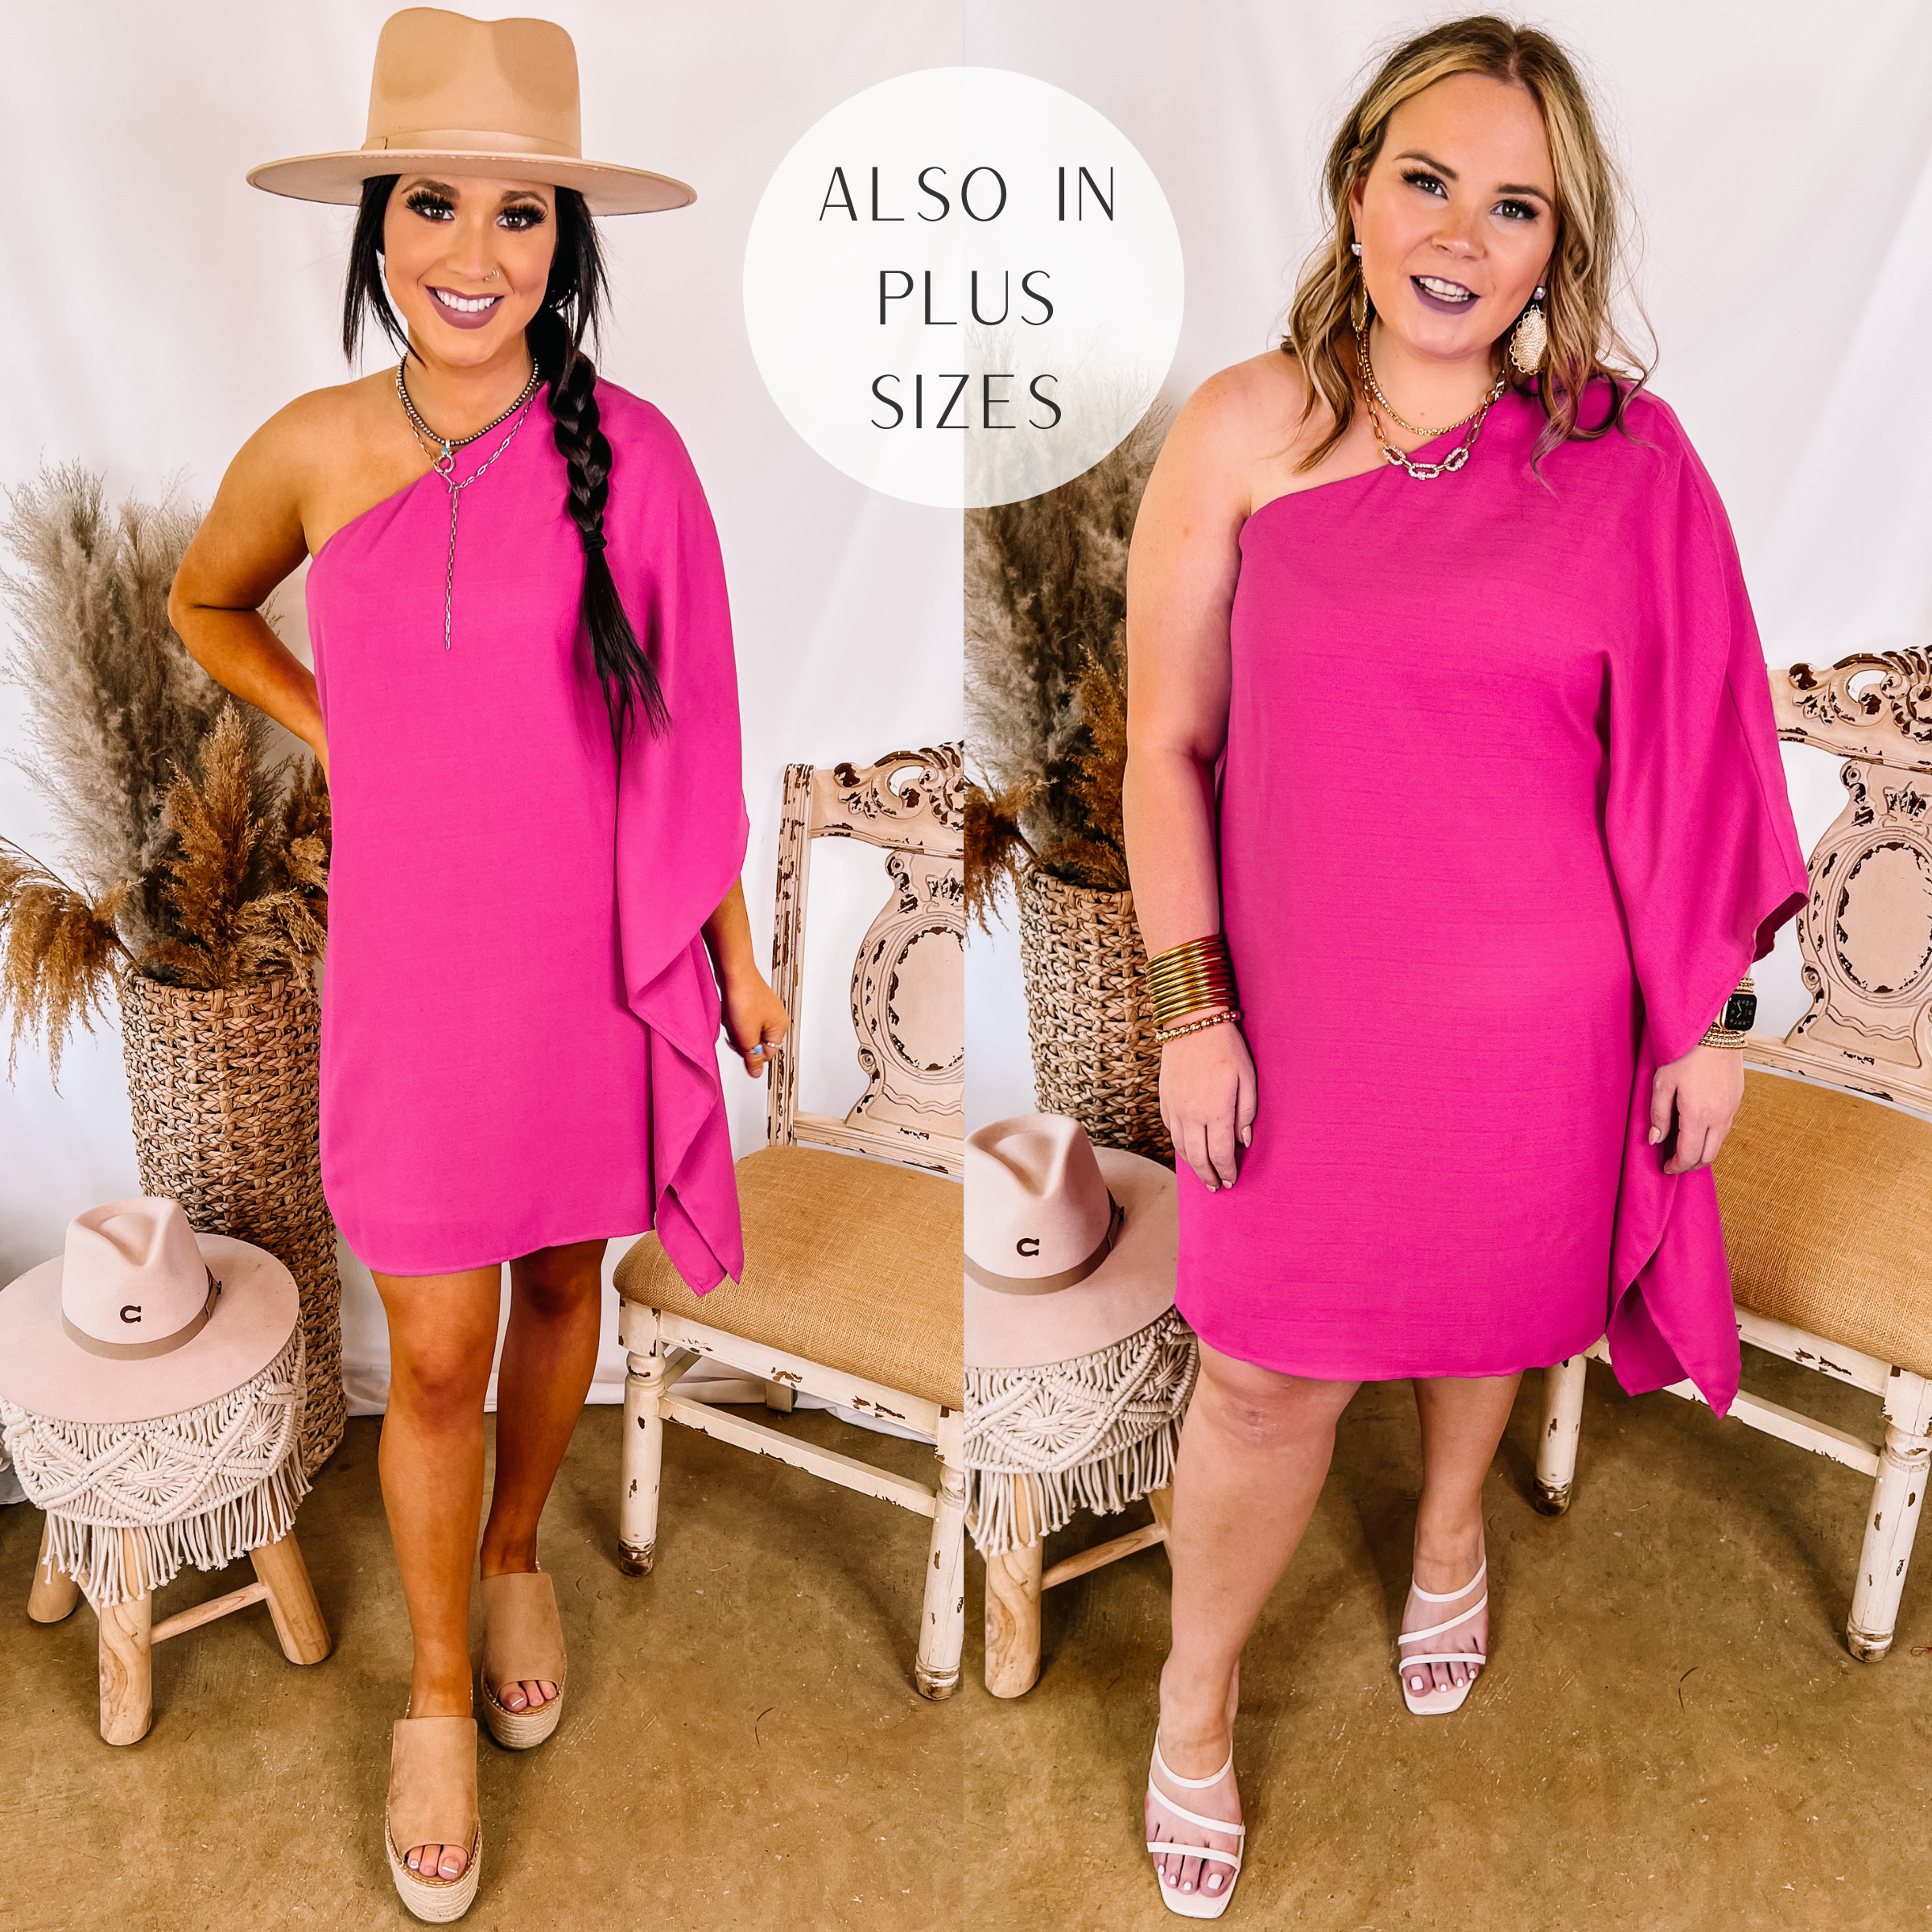 Models are wearing a pink one shoulder drape dress. Size small model has it paired with tan wedges and a tan hat. SIze large model has it paired with white heels and gold jewelry.